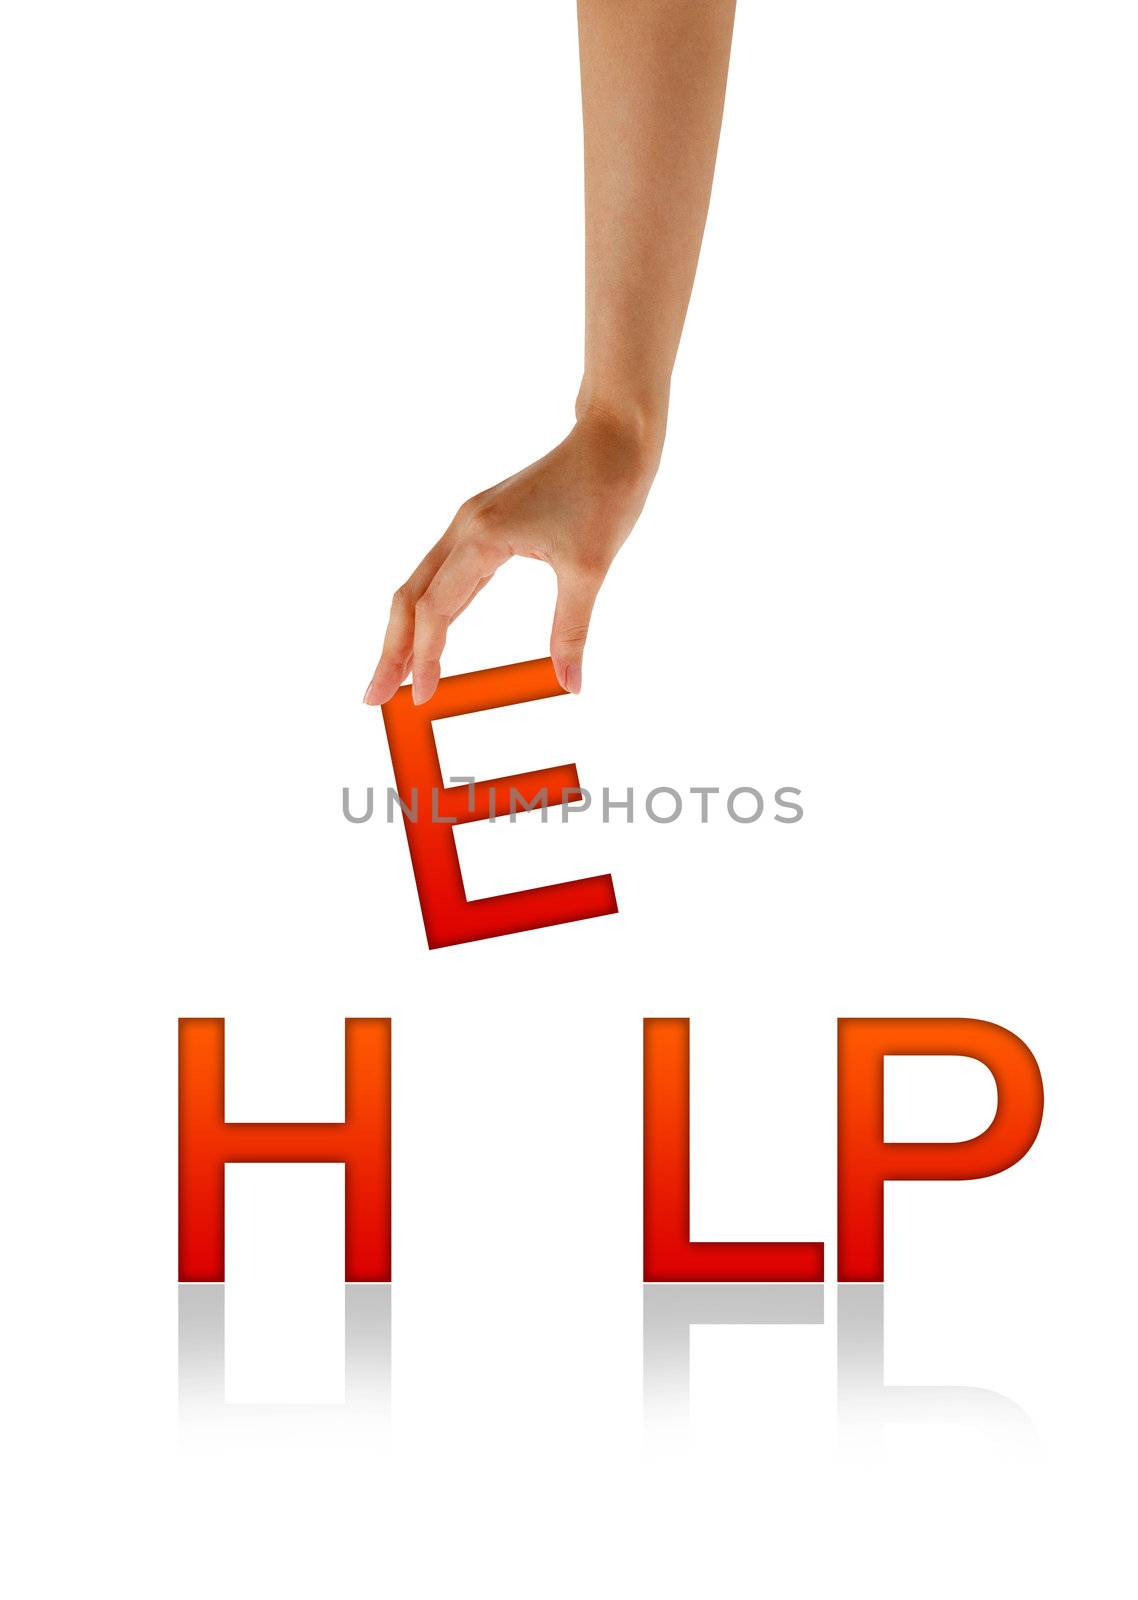 High resolution graphic of a hand holding the letter E from the word Help.